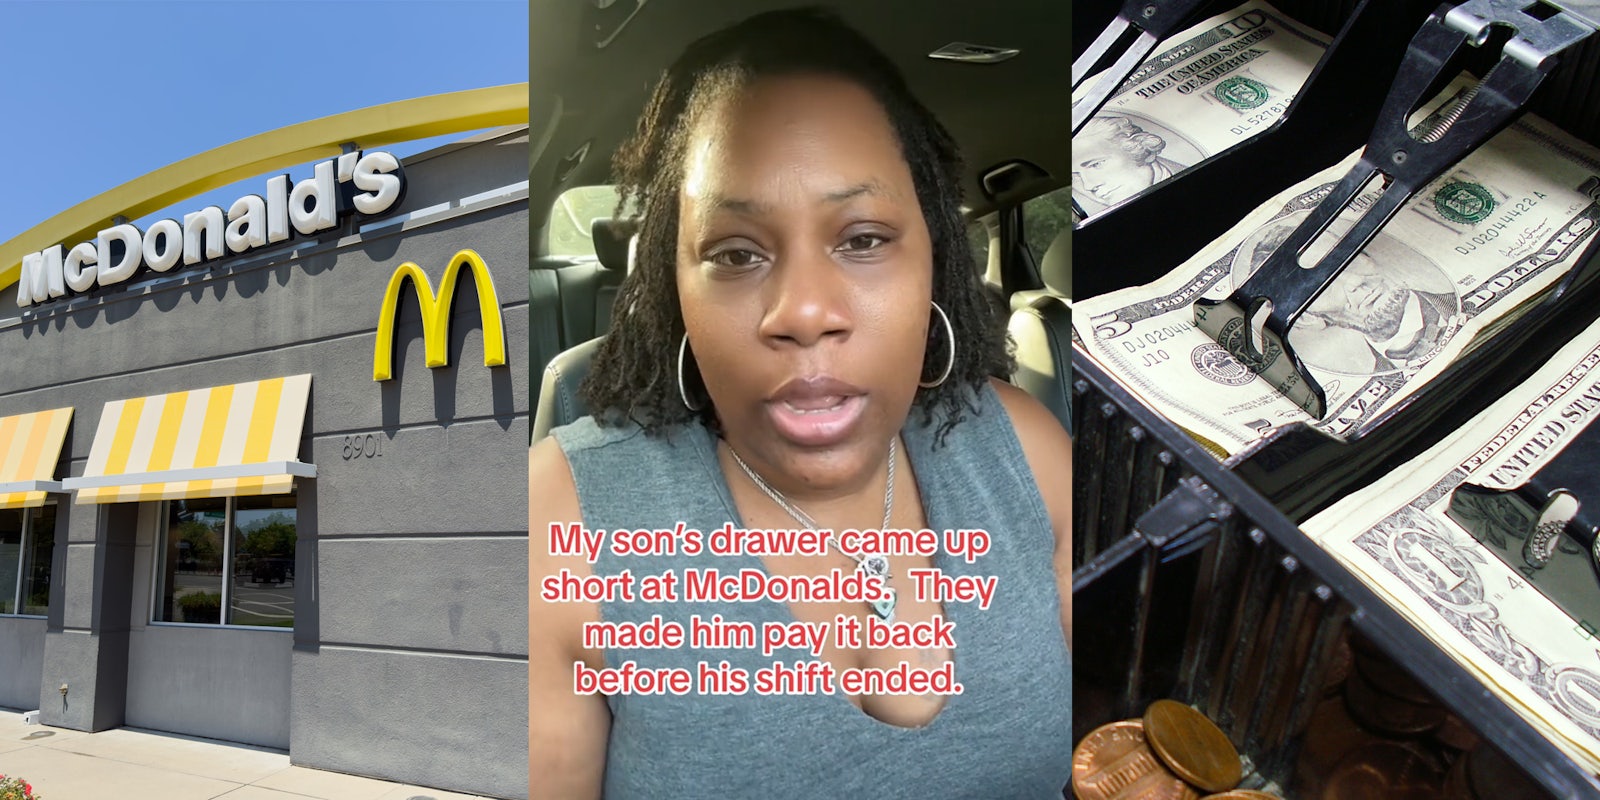 McDonald's building with signs (l) McDonald's worker's mother speaking in car with caption 'My son's drawer came up short at McDonald's. They made him pay it back before his shift ended.' (c) open cash register drawer (r)